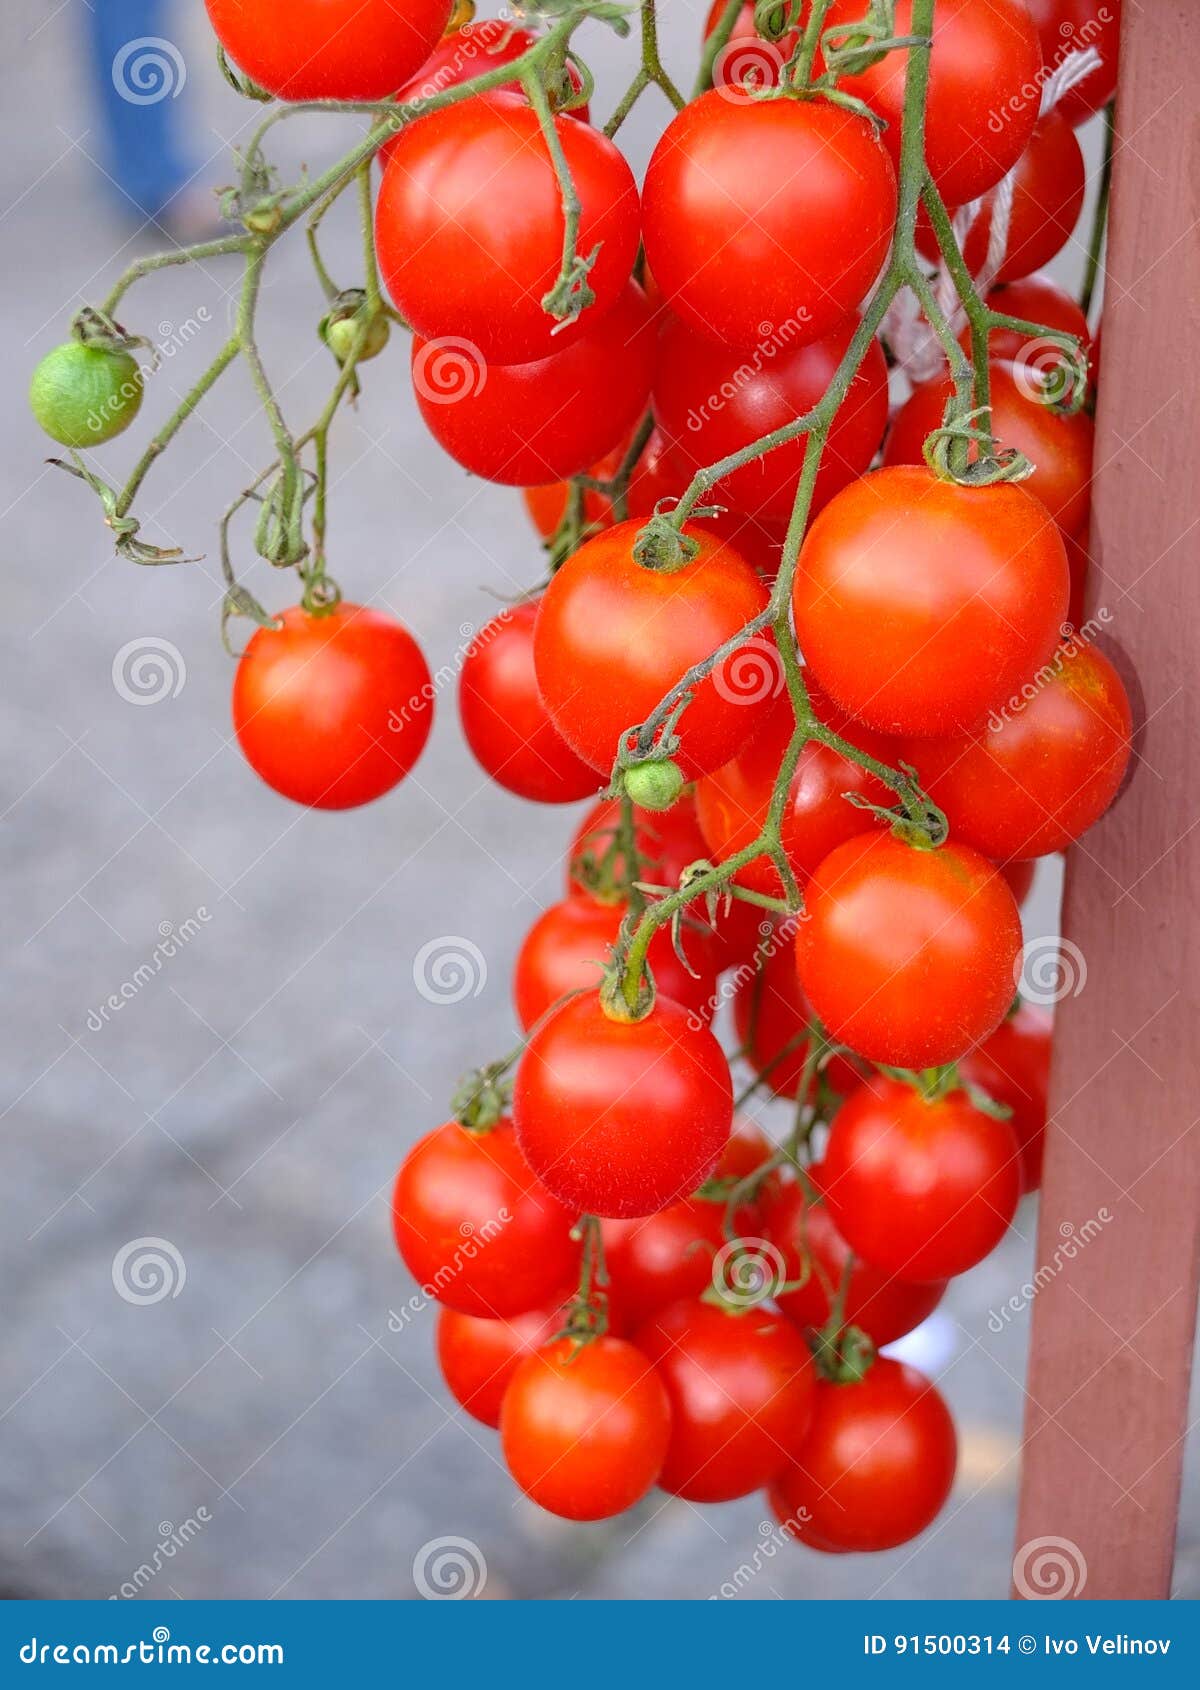 branch of fresh cherry tomatoes hanging on trees